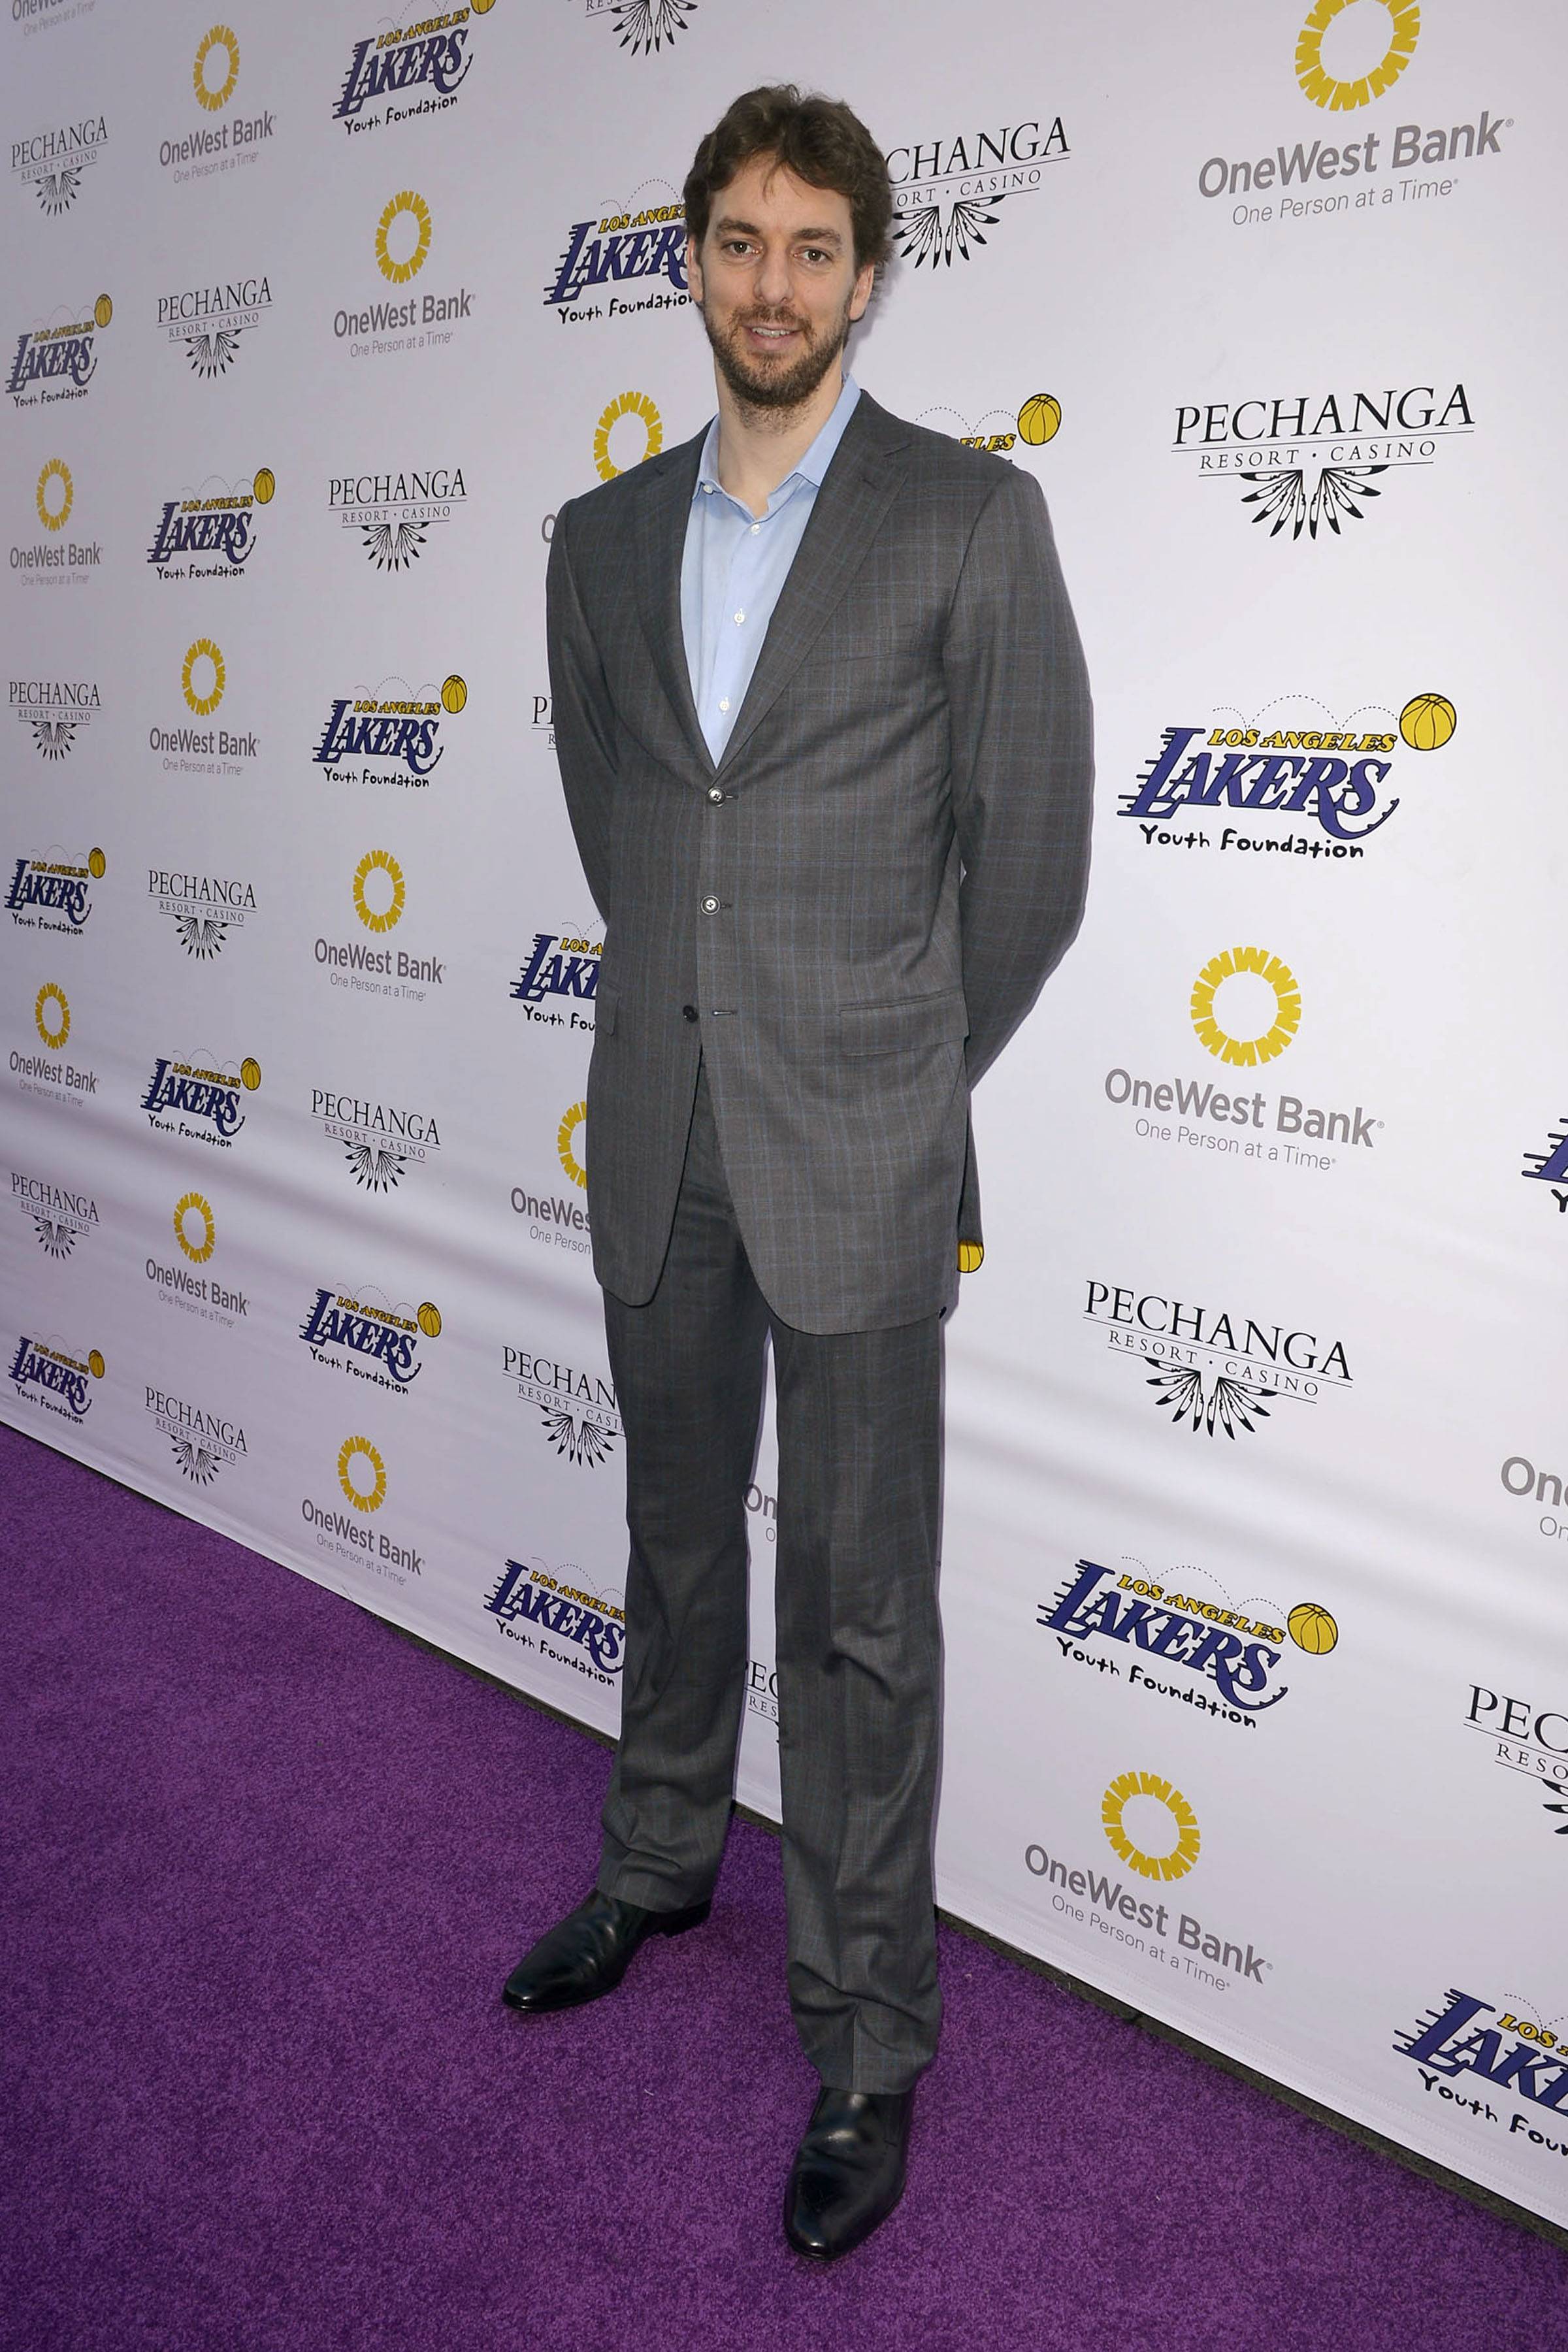 Laker Foundation Event & Party